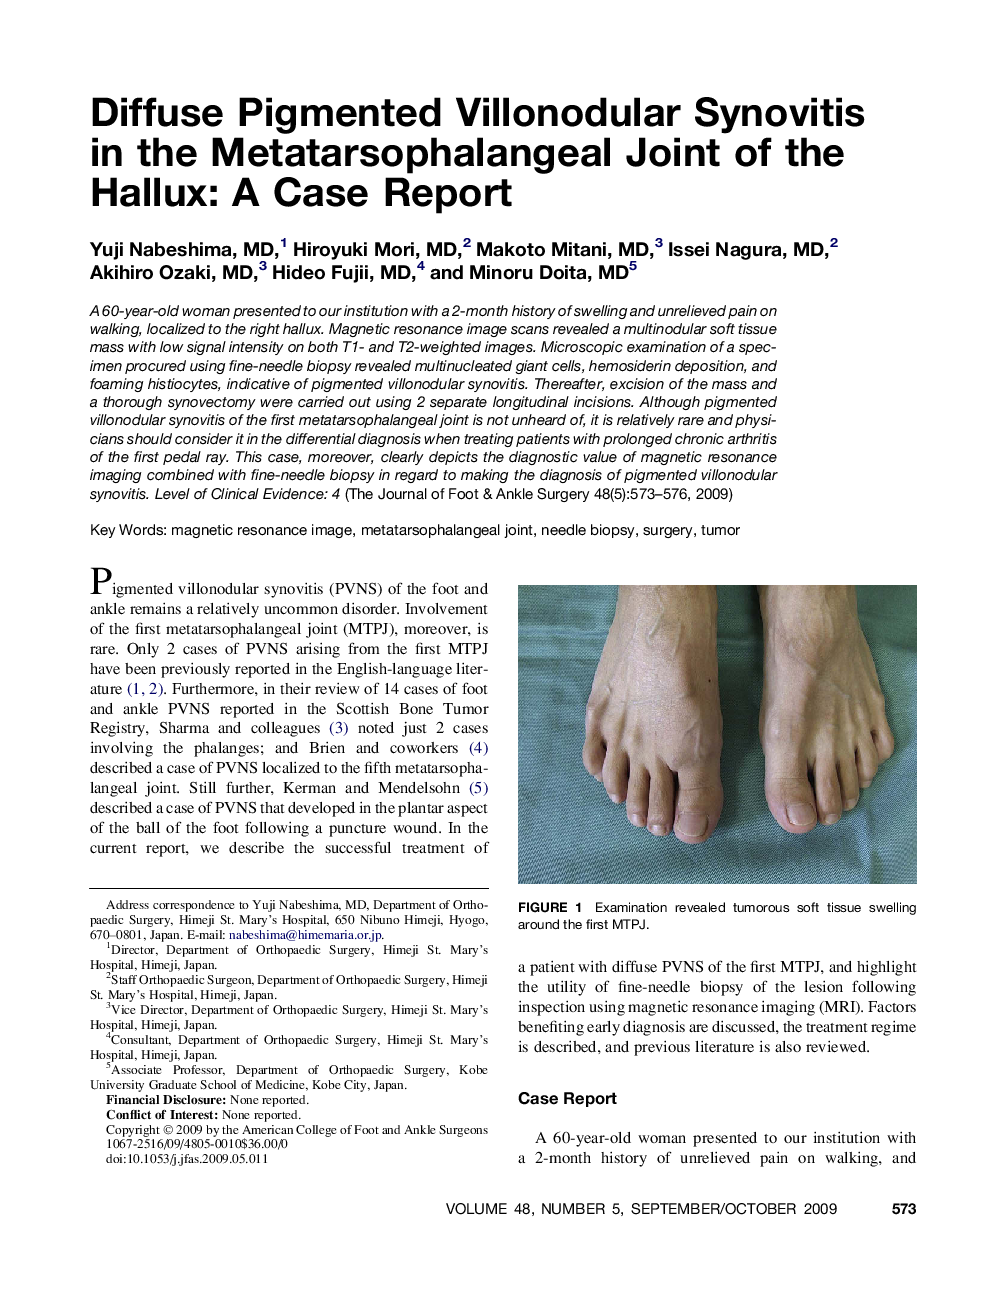 Diffuse Pigmented Villonodular Synovitis in the Metatarsophalangeal Joint of the Hallux: A Case Report